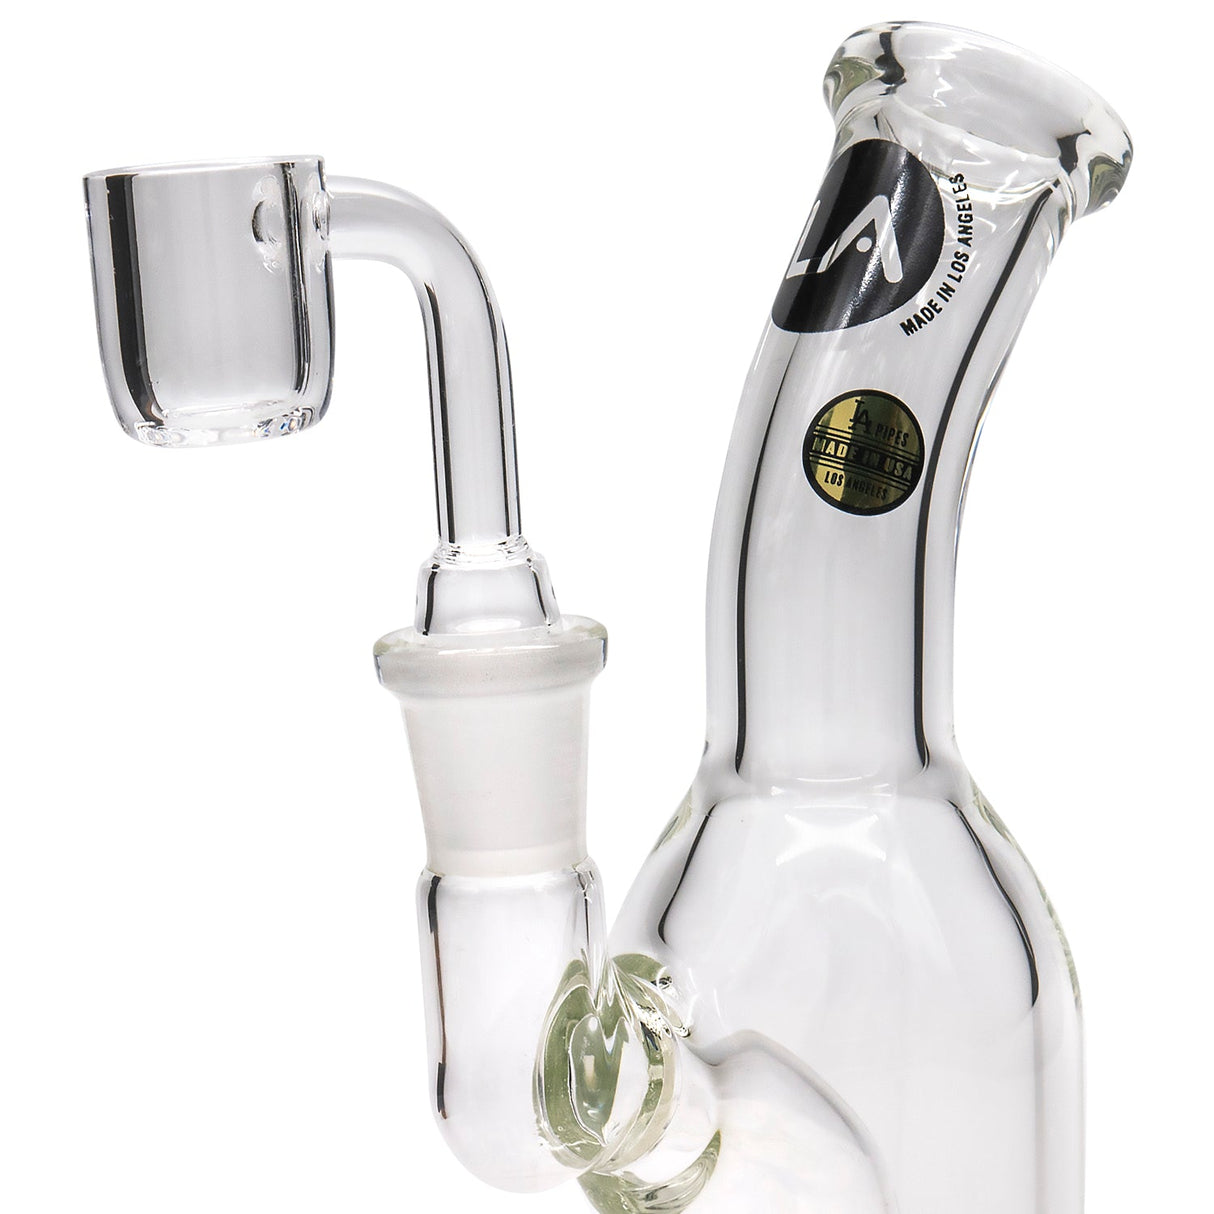 LA Pipes Compact Bent Neck Concentrate Waterpipe with Quartz Banger, 90 Degree Joint